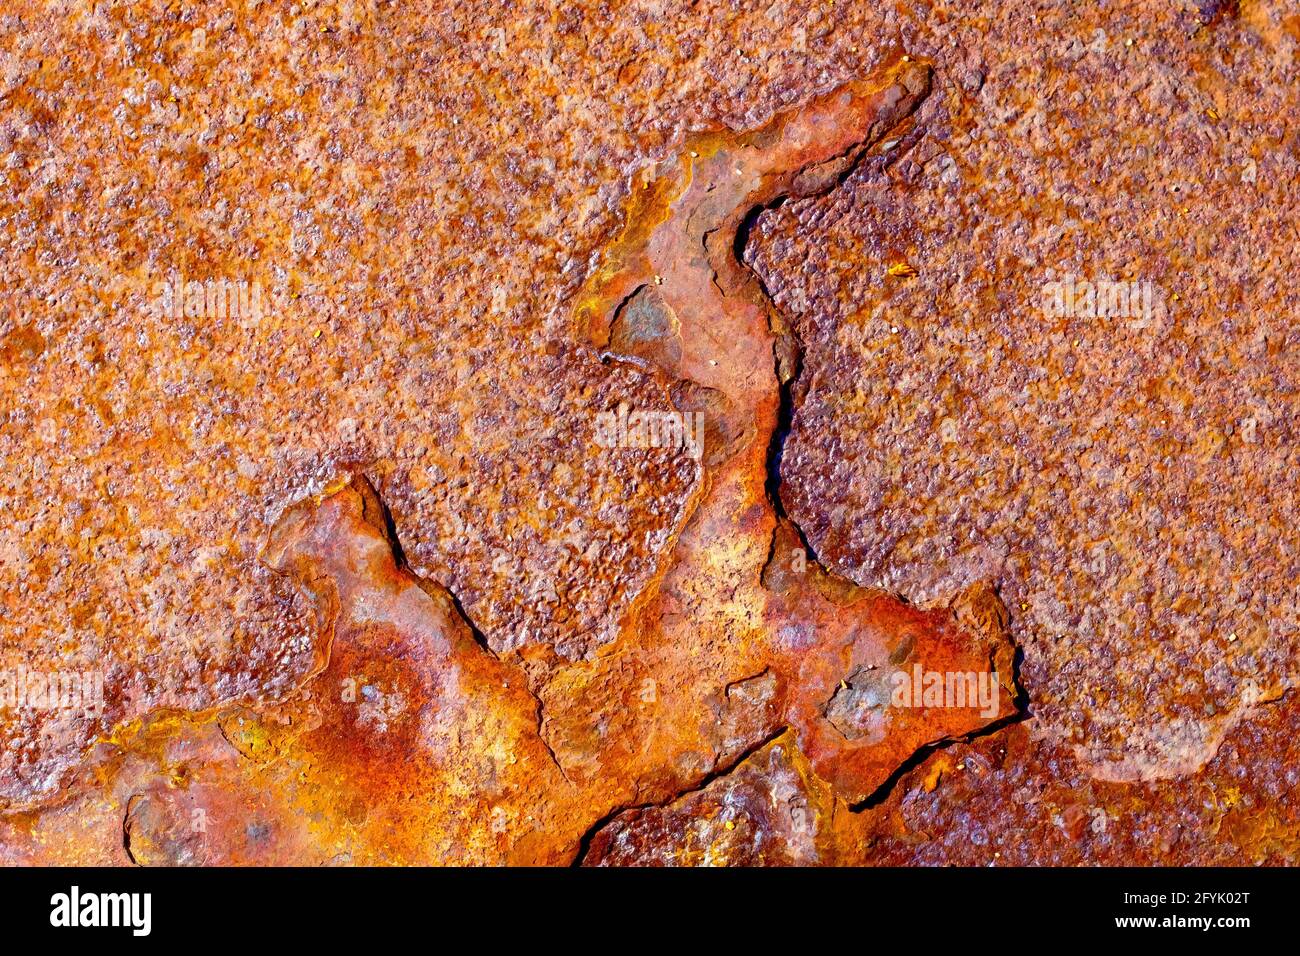 Close up of the pattern of corrosion on the surface of a rusty sheet of metal showing various degrees of oxidation. Stock Photo